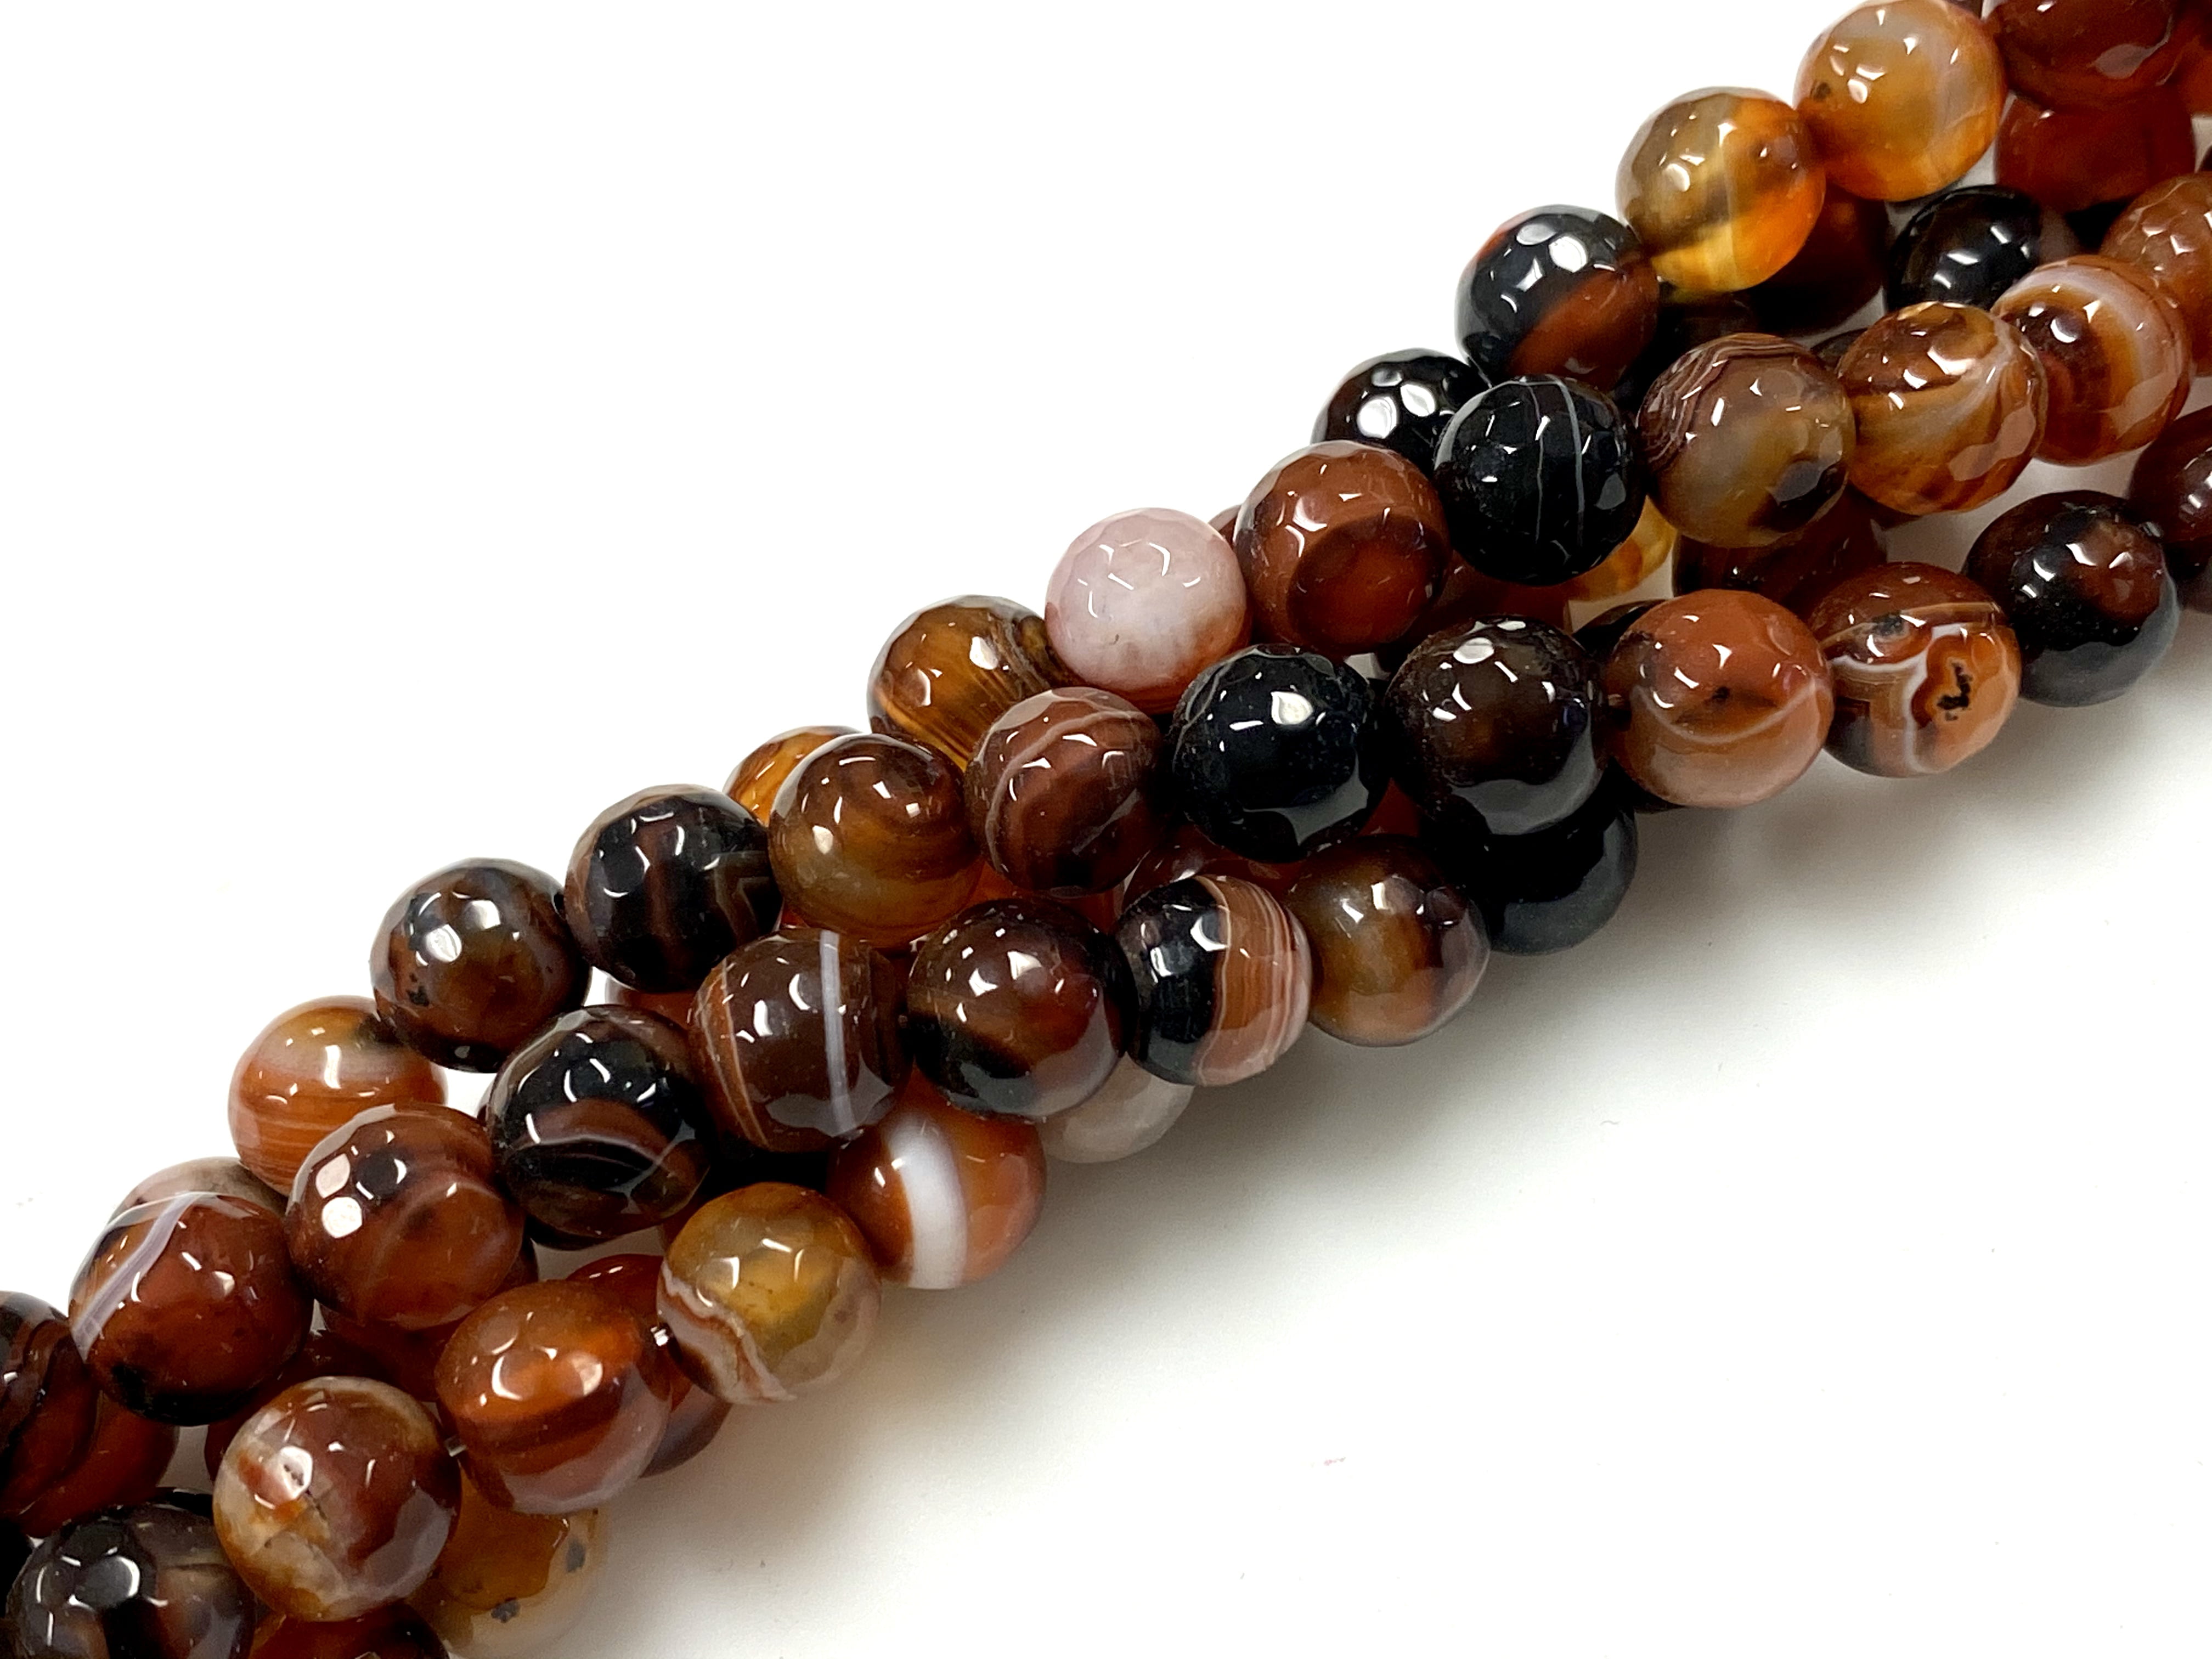 Black and White Fire Agate Gemstone Round Shape Faceted Beads Strand Beads Size 6mm 8mm Healing Gemstone Beads for DIY Jewelry Making